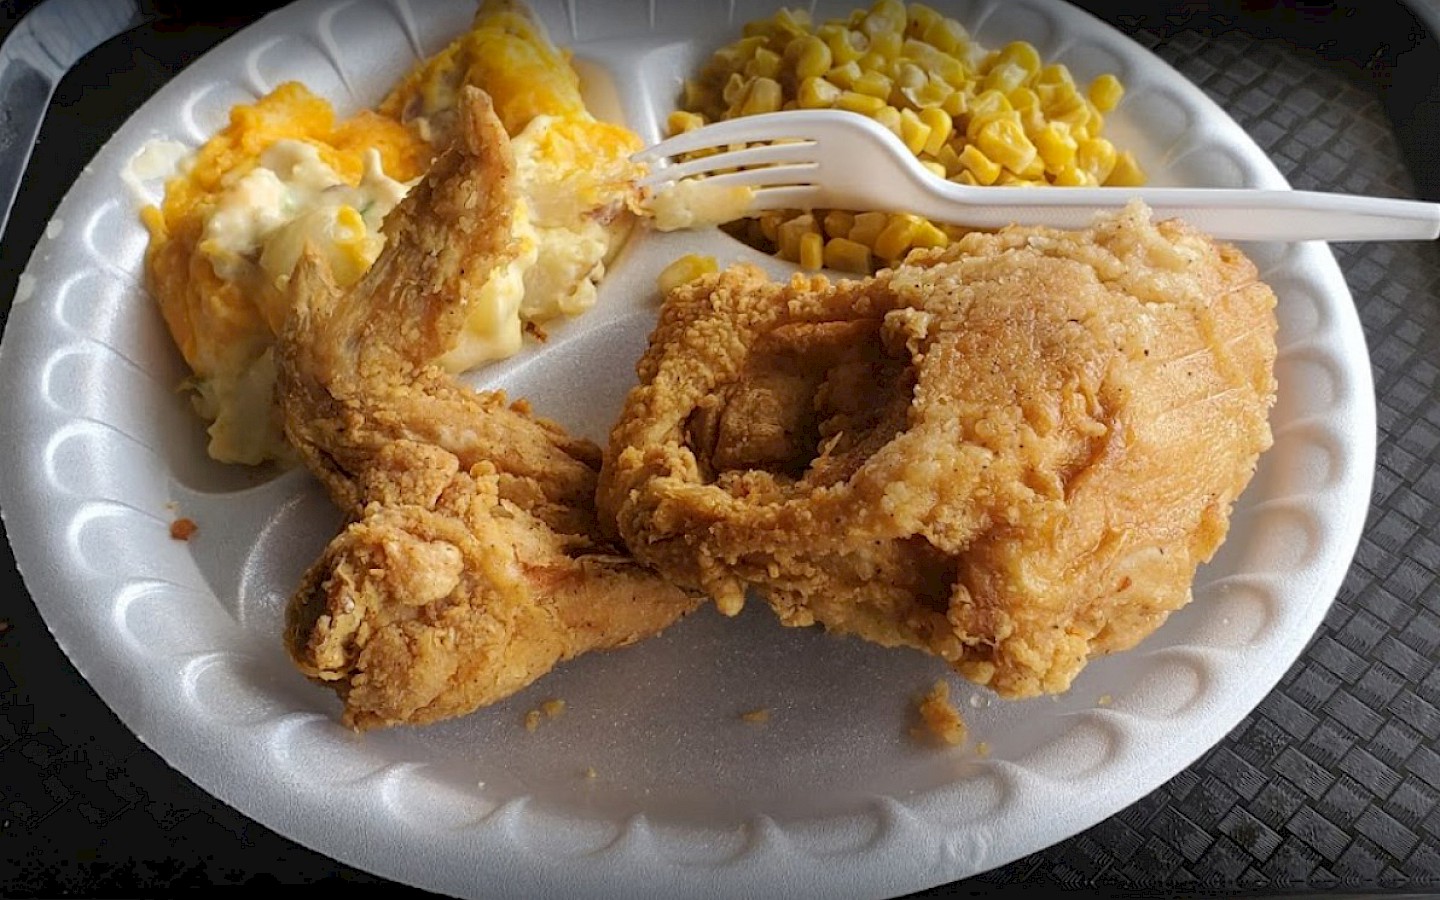 fried chicken along with corn and peach cobbler on a styrofoam plate